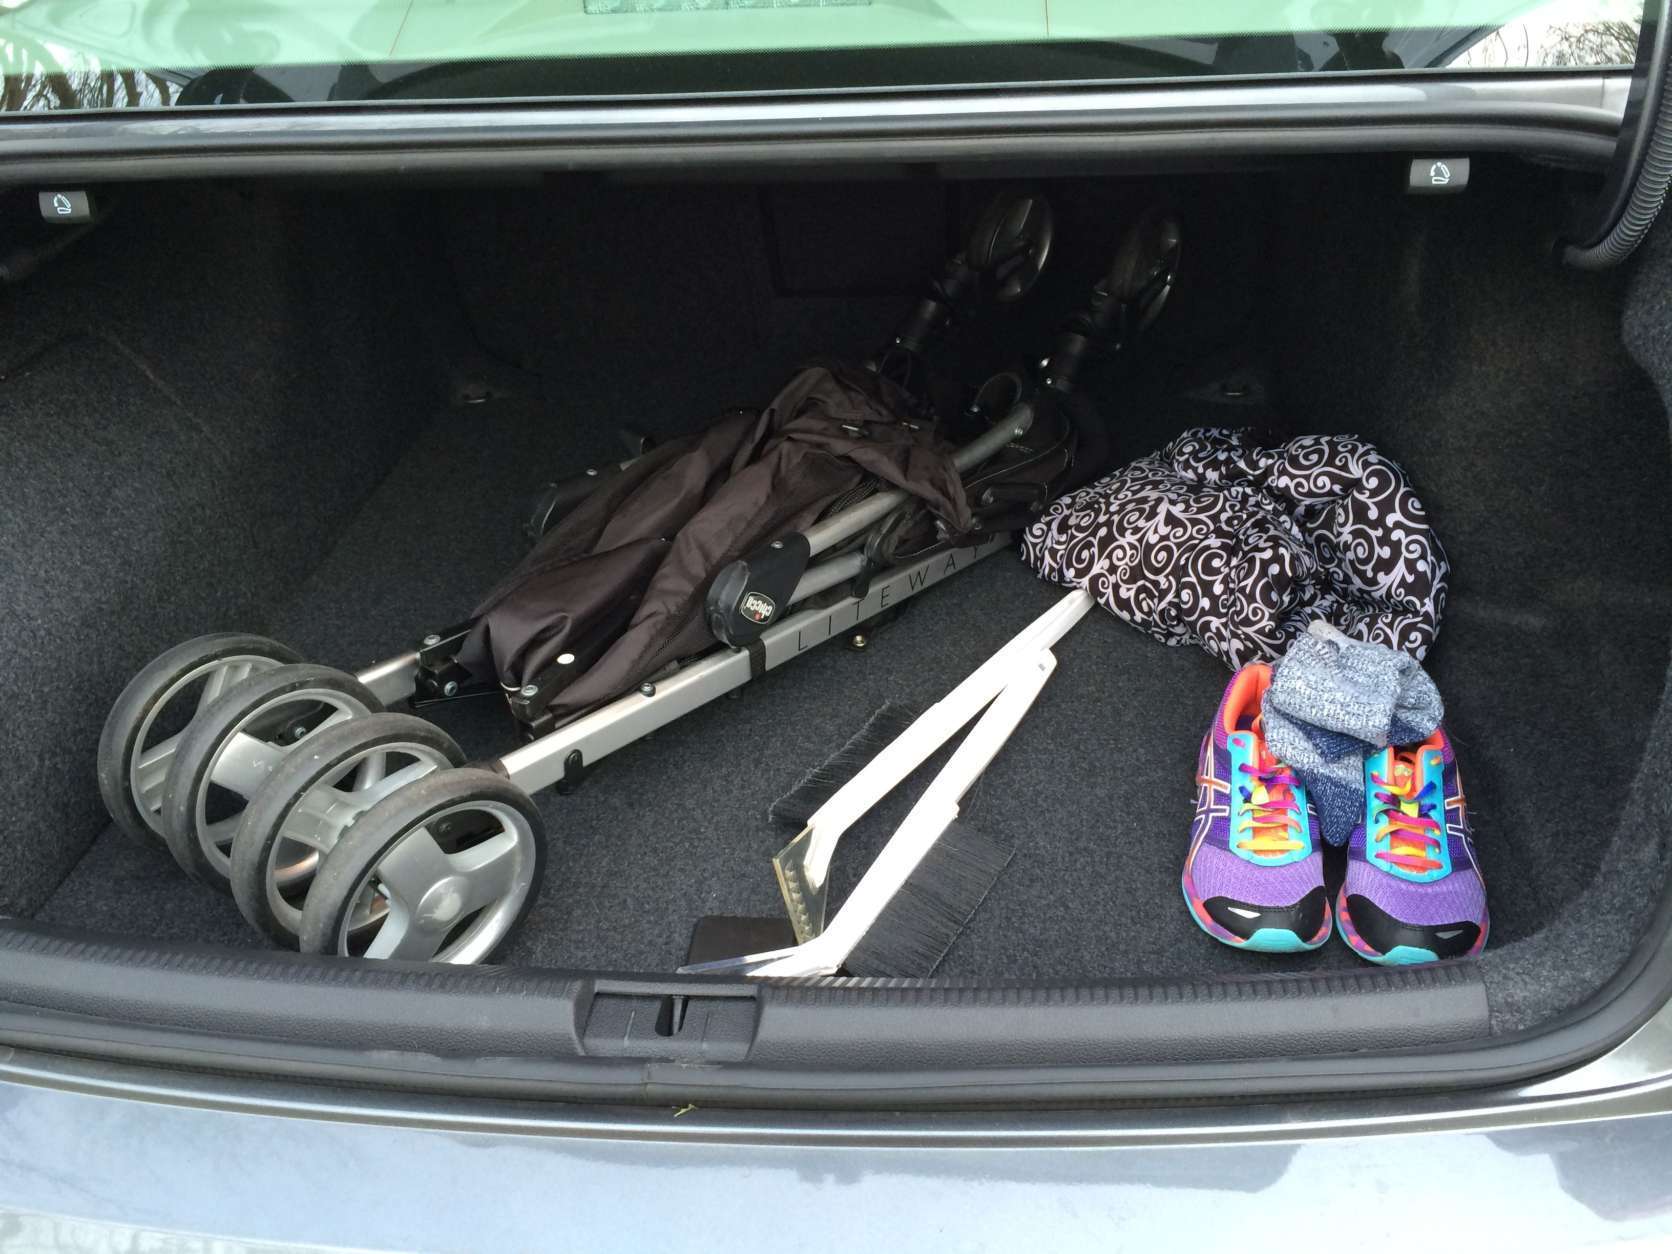 Mike Parris said the Volkswagen Passat has a lot of room in the trunk. (WTOP/Mike Parris) 